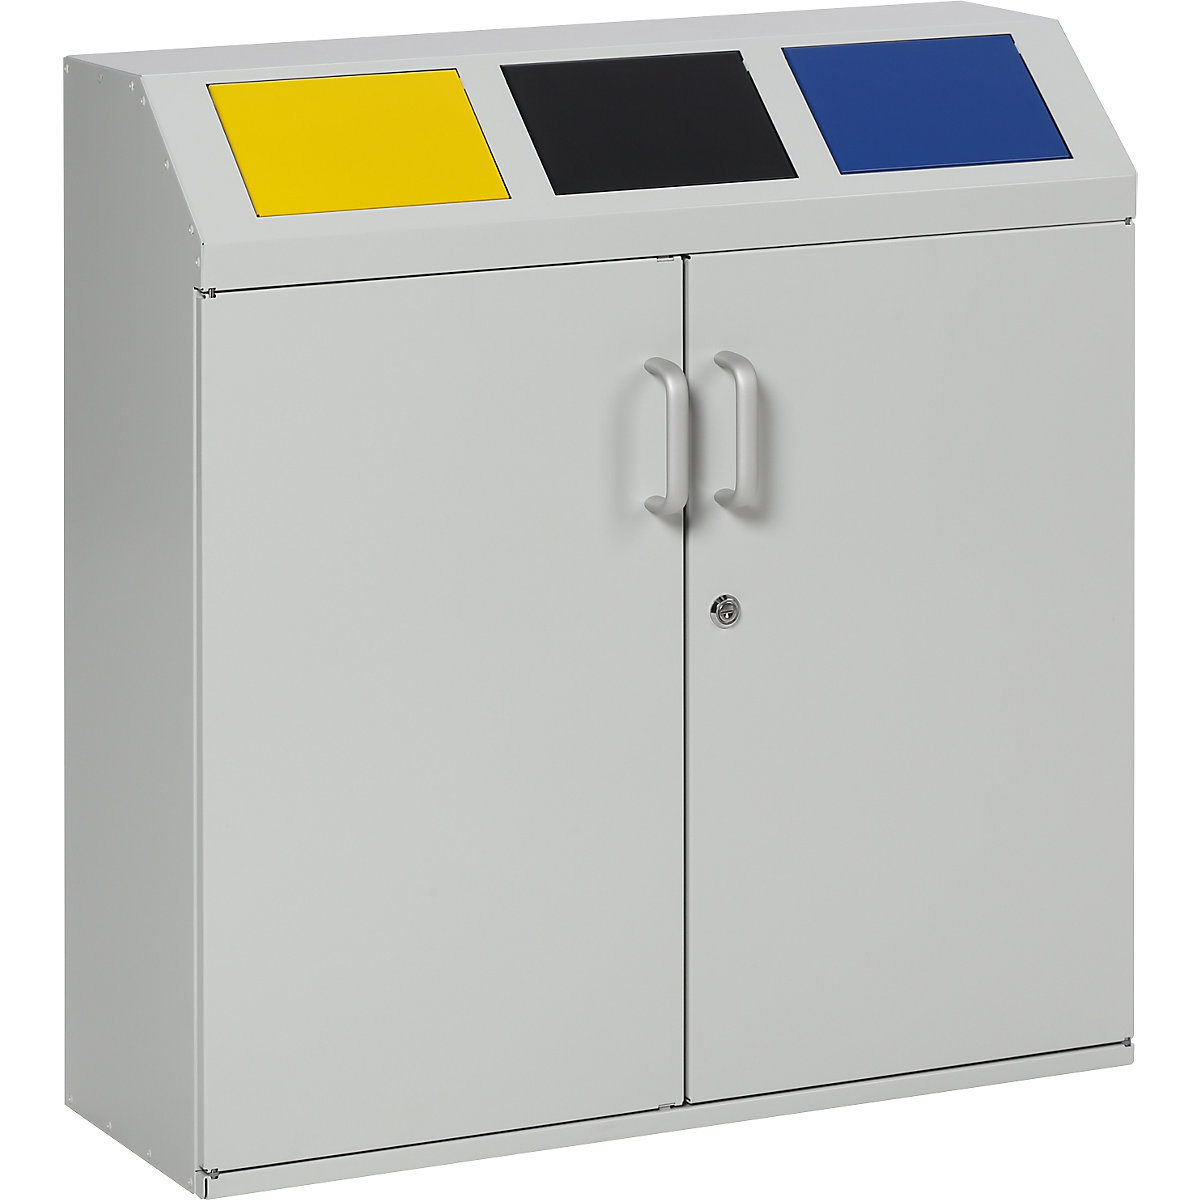 Recyclable waste collection cupboard – eurokraft pro, capacity 3 x 50 l, light grey RAL 7035-5